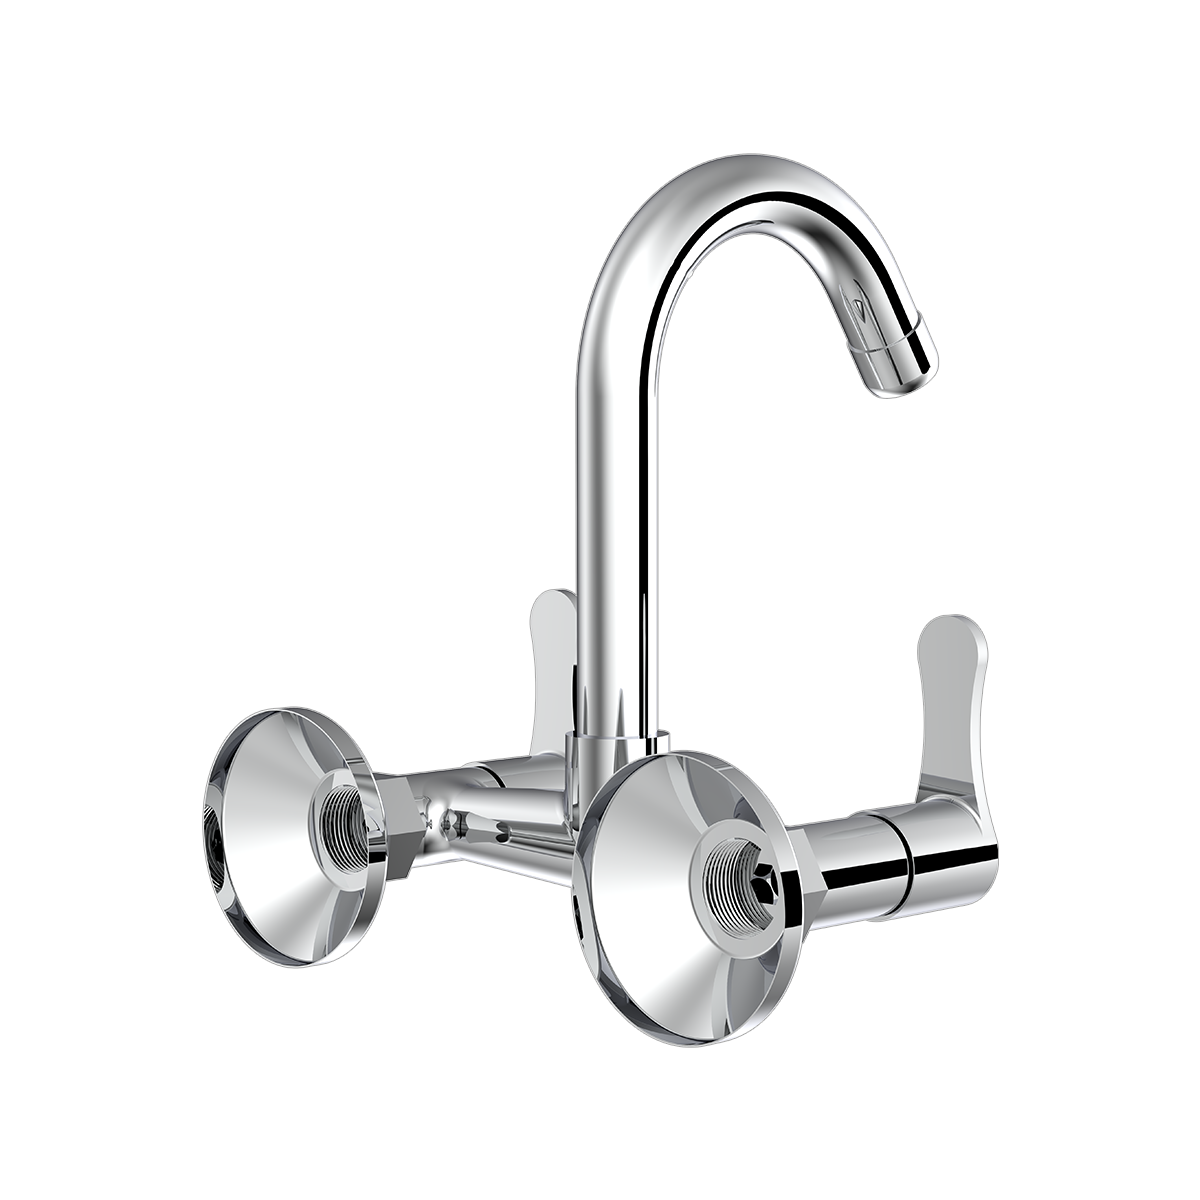 Wall Mounted Sink Mixer With Swivel Spout